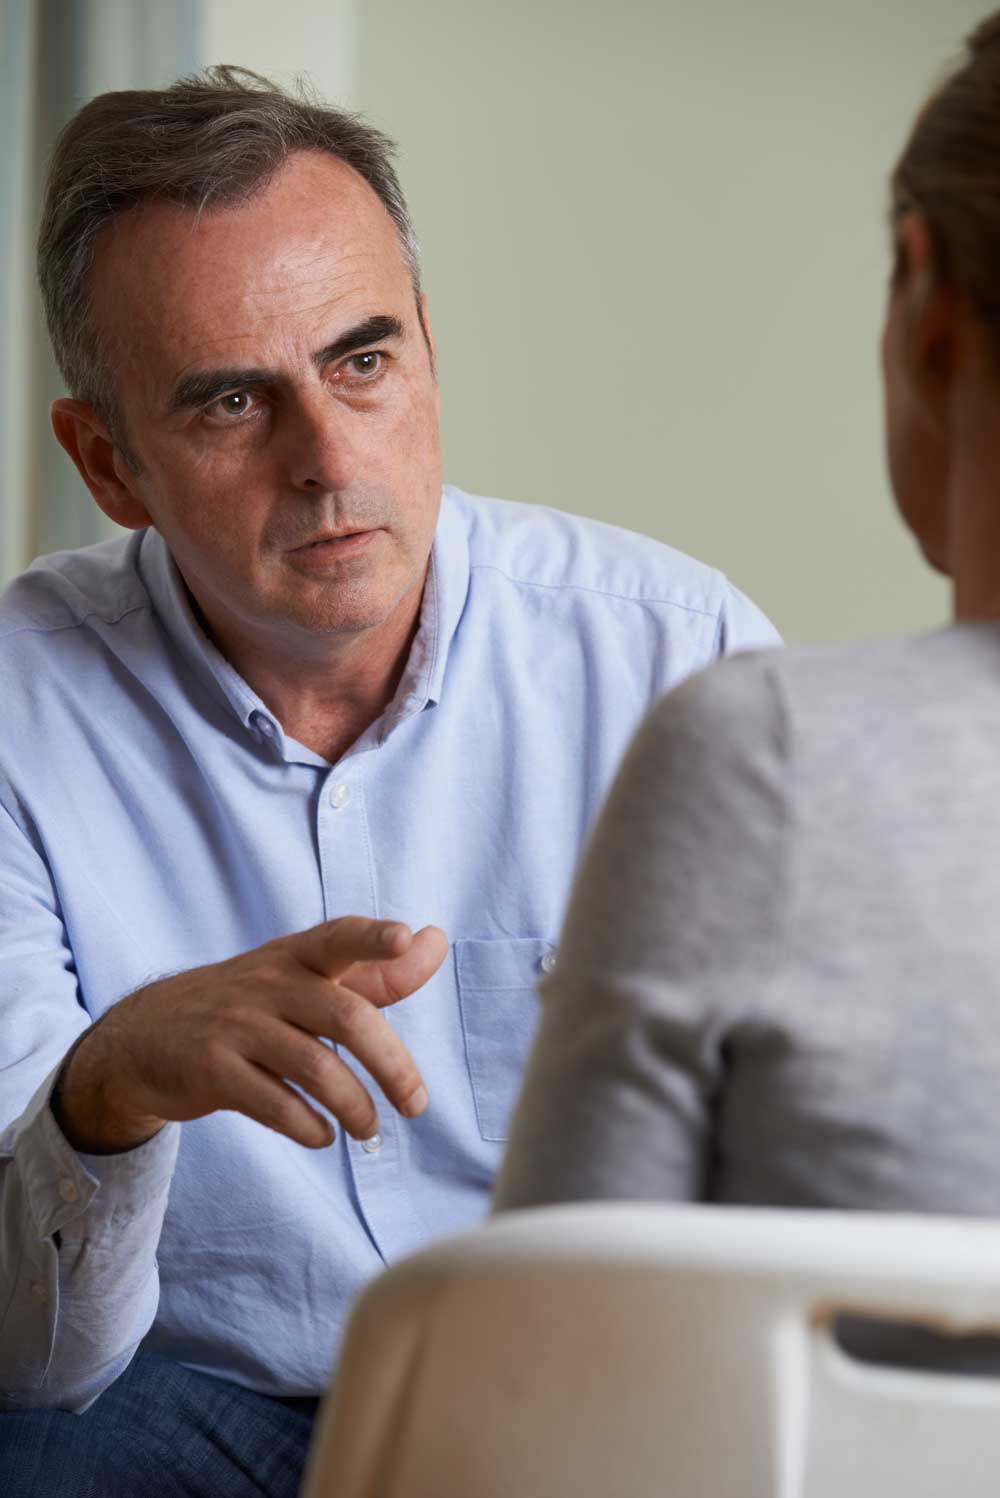 A Depressed Man Speaking With Counselor